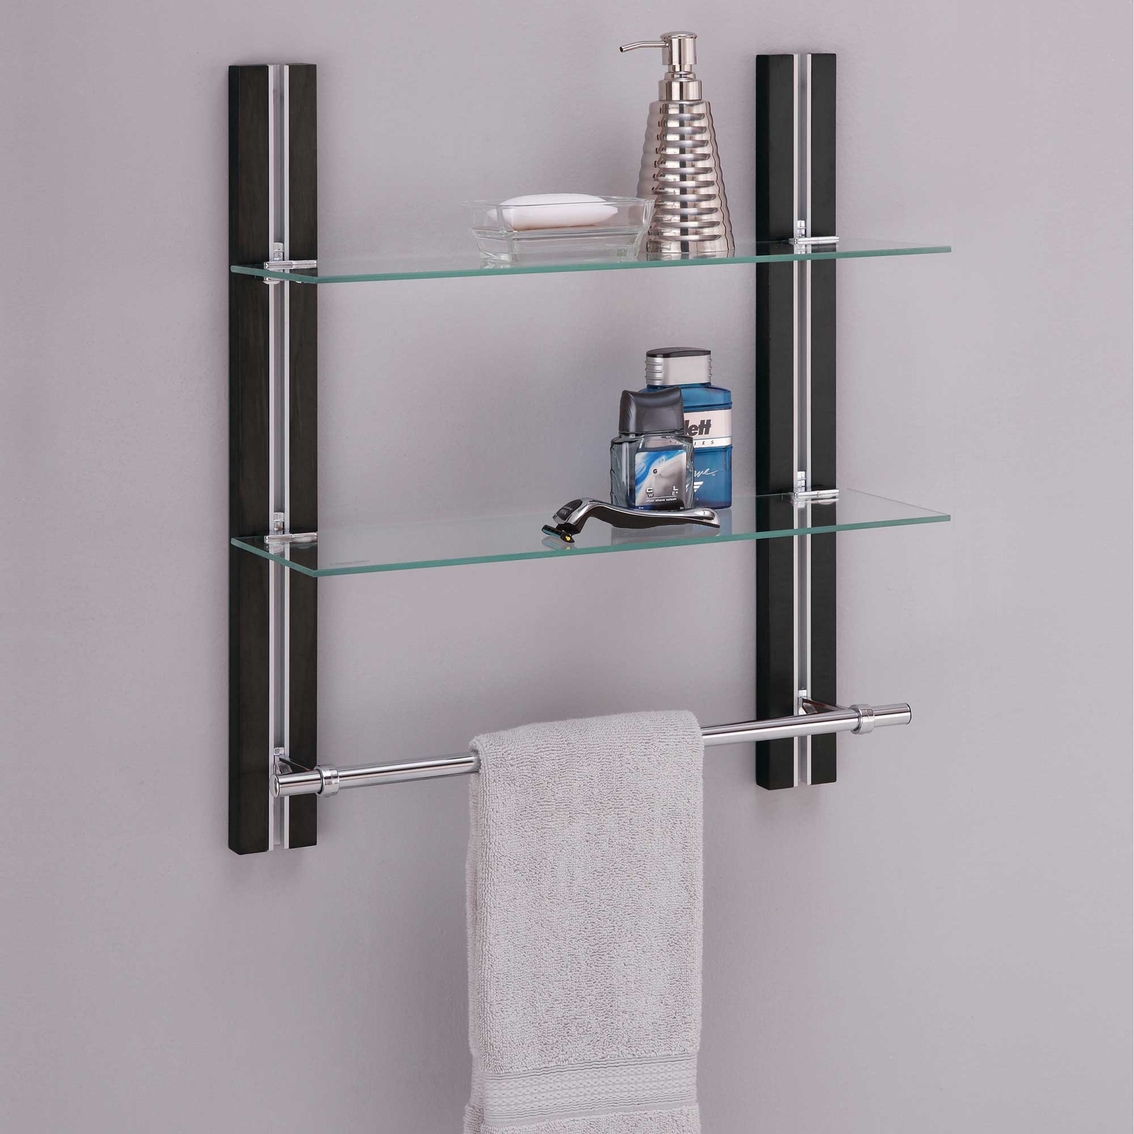 Neu Home Deluxe Tempered Glass Shelf with Towel Bar - Image 3 of 3